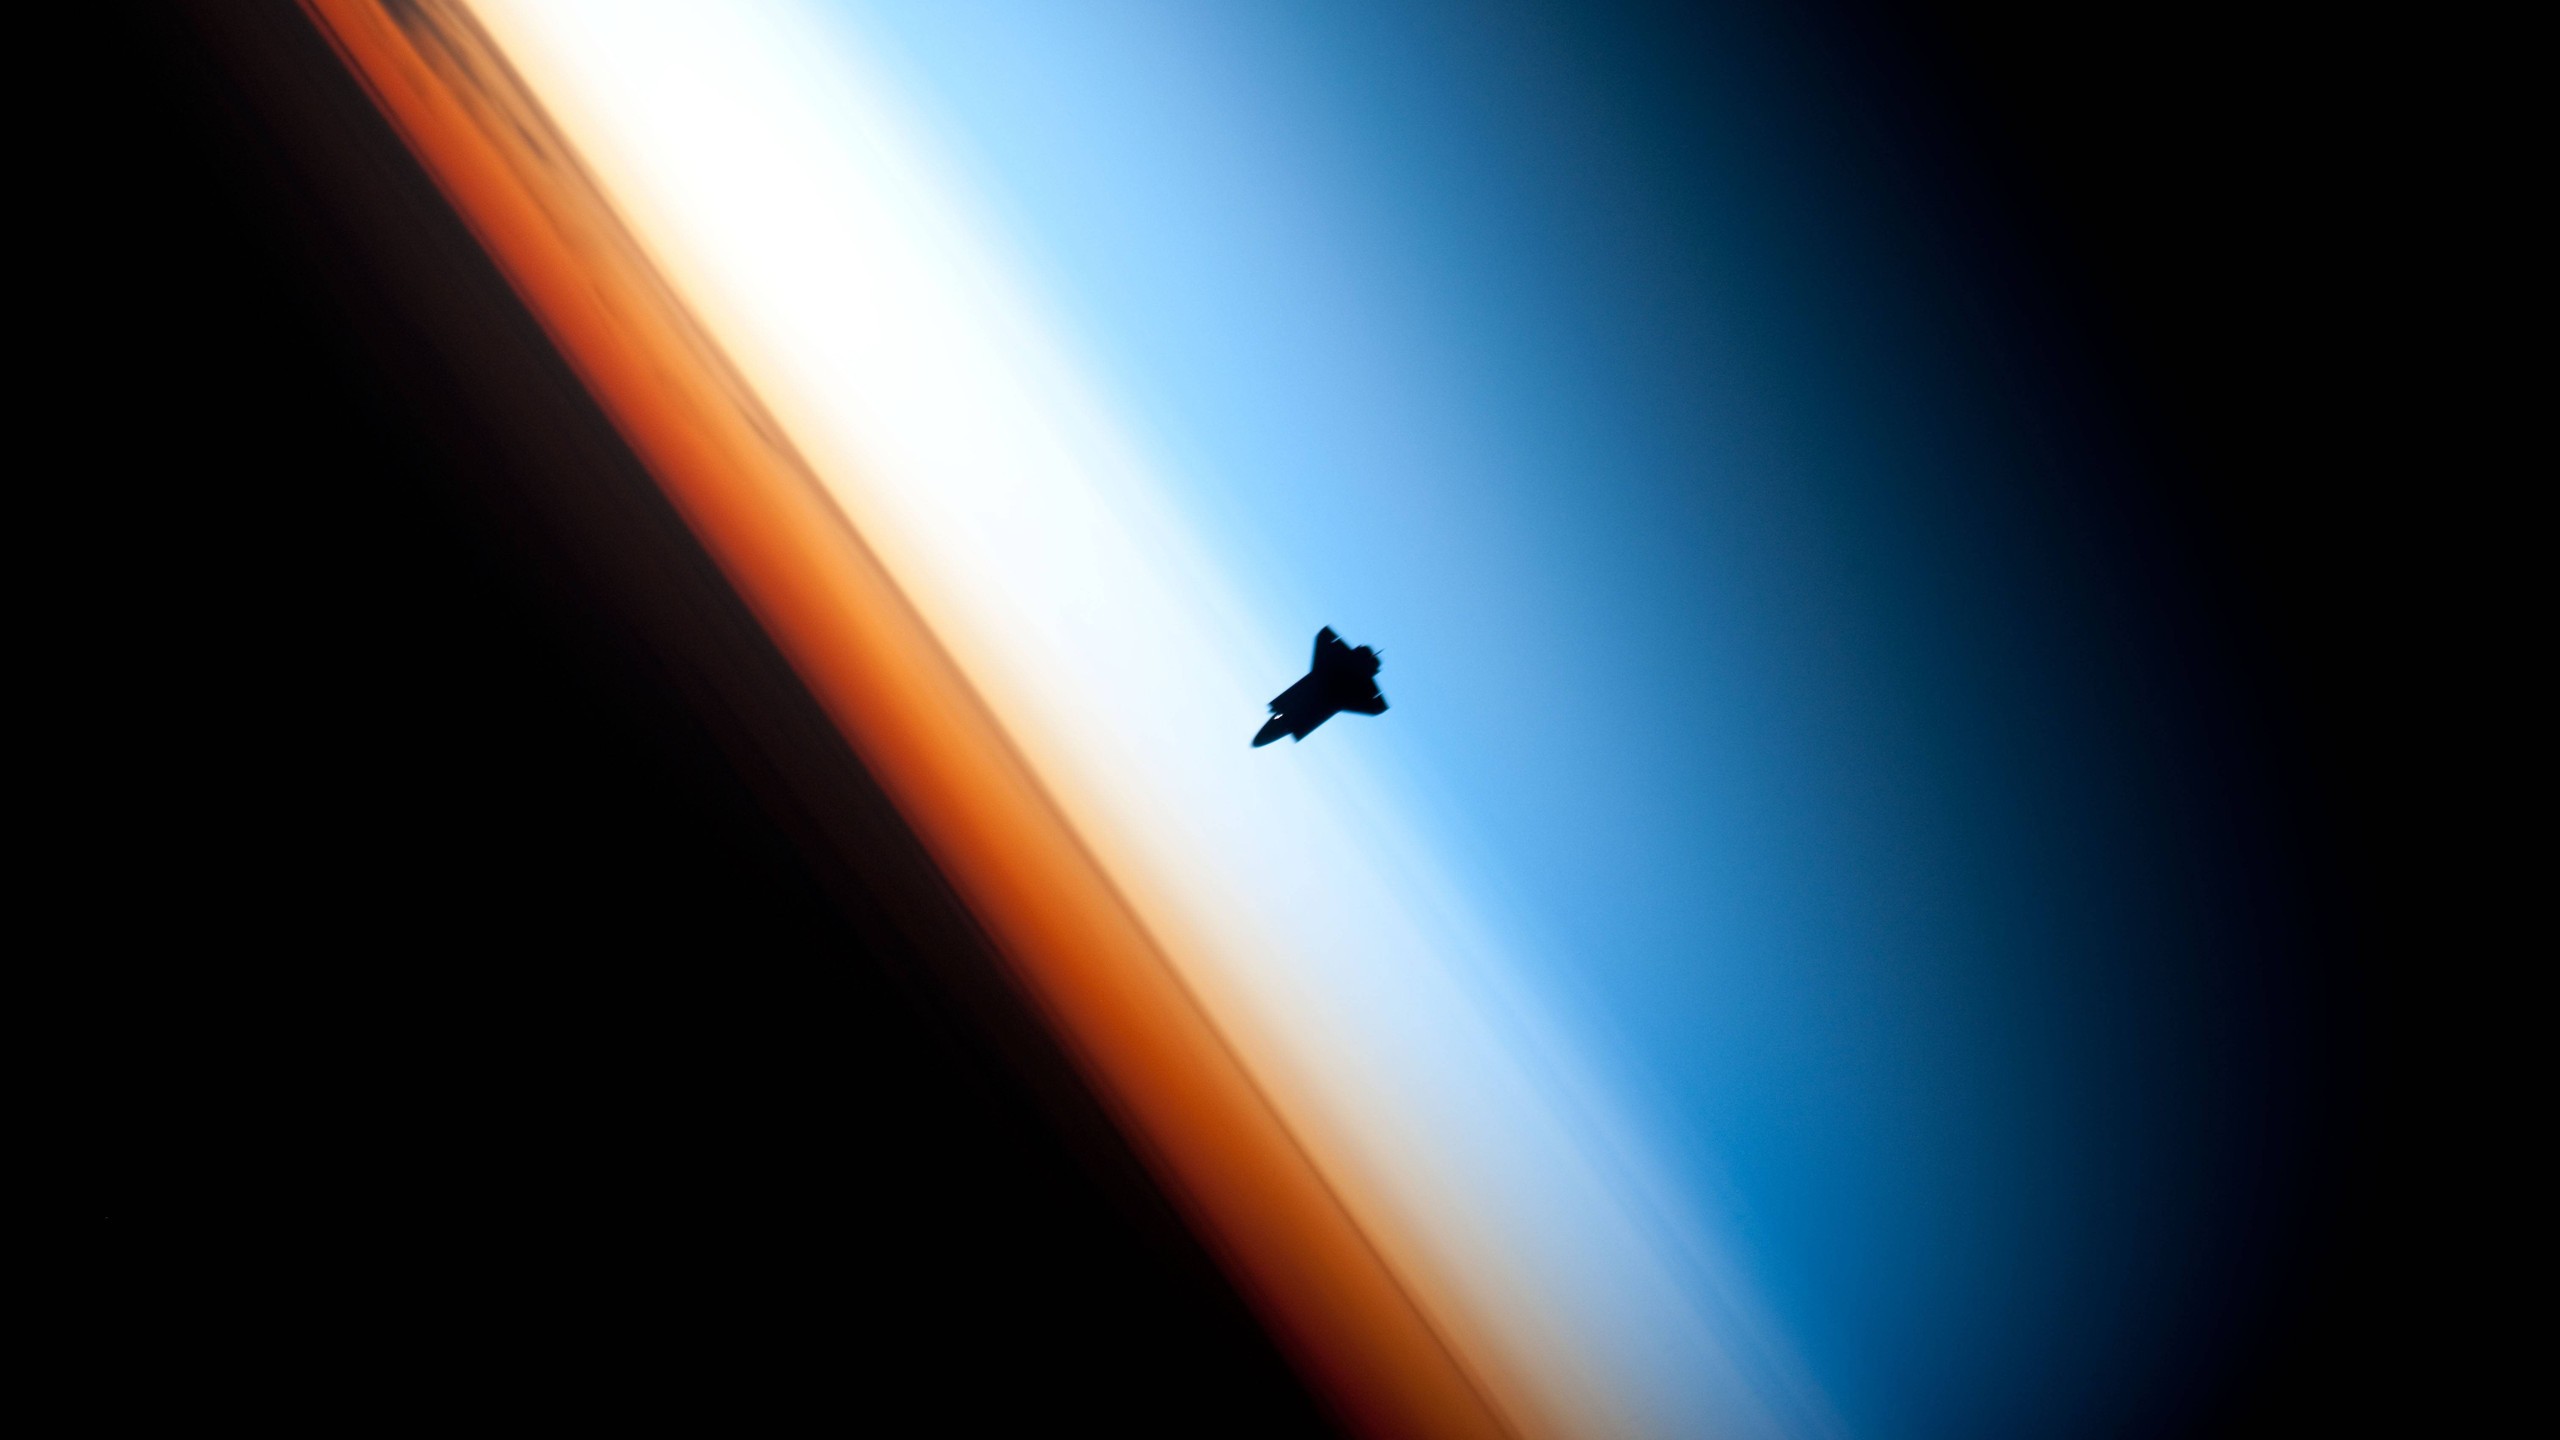 General 2560x1440 NASA space space shuttle silhouette